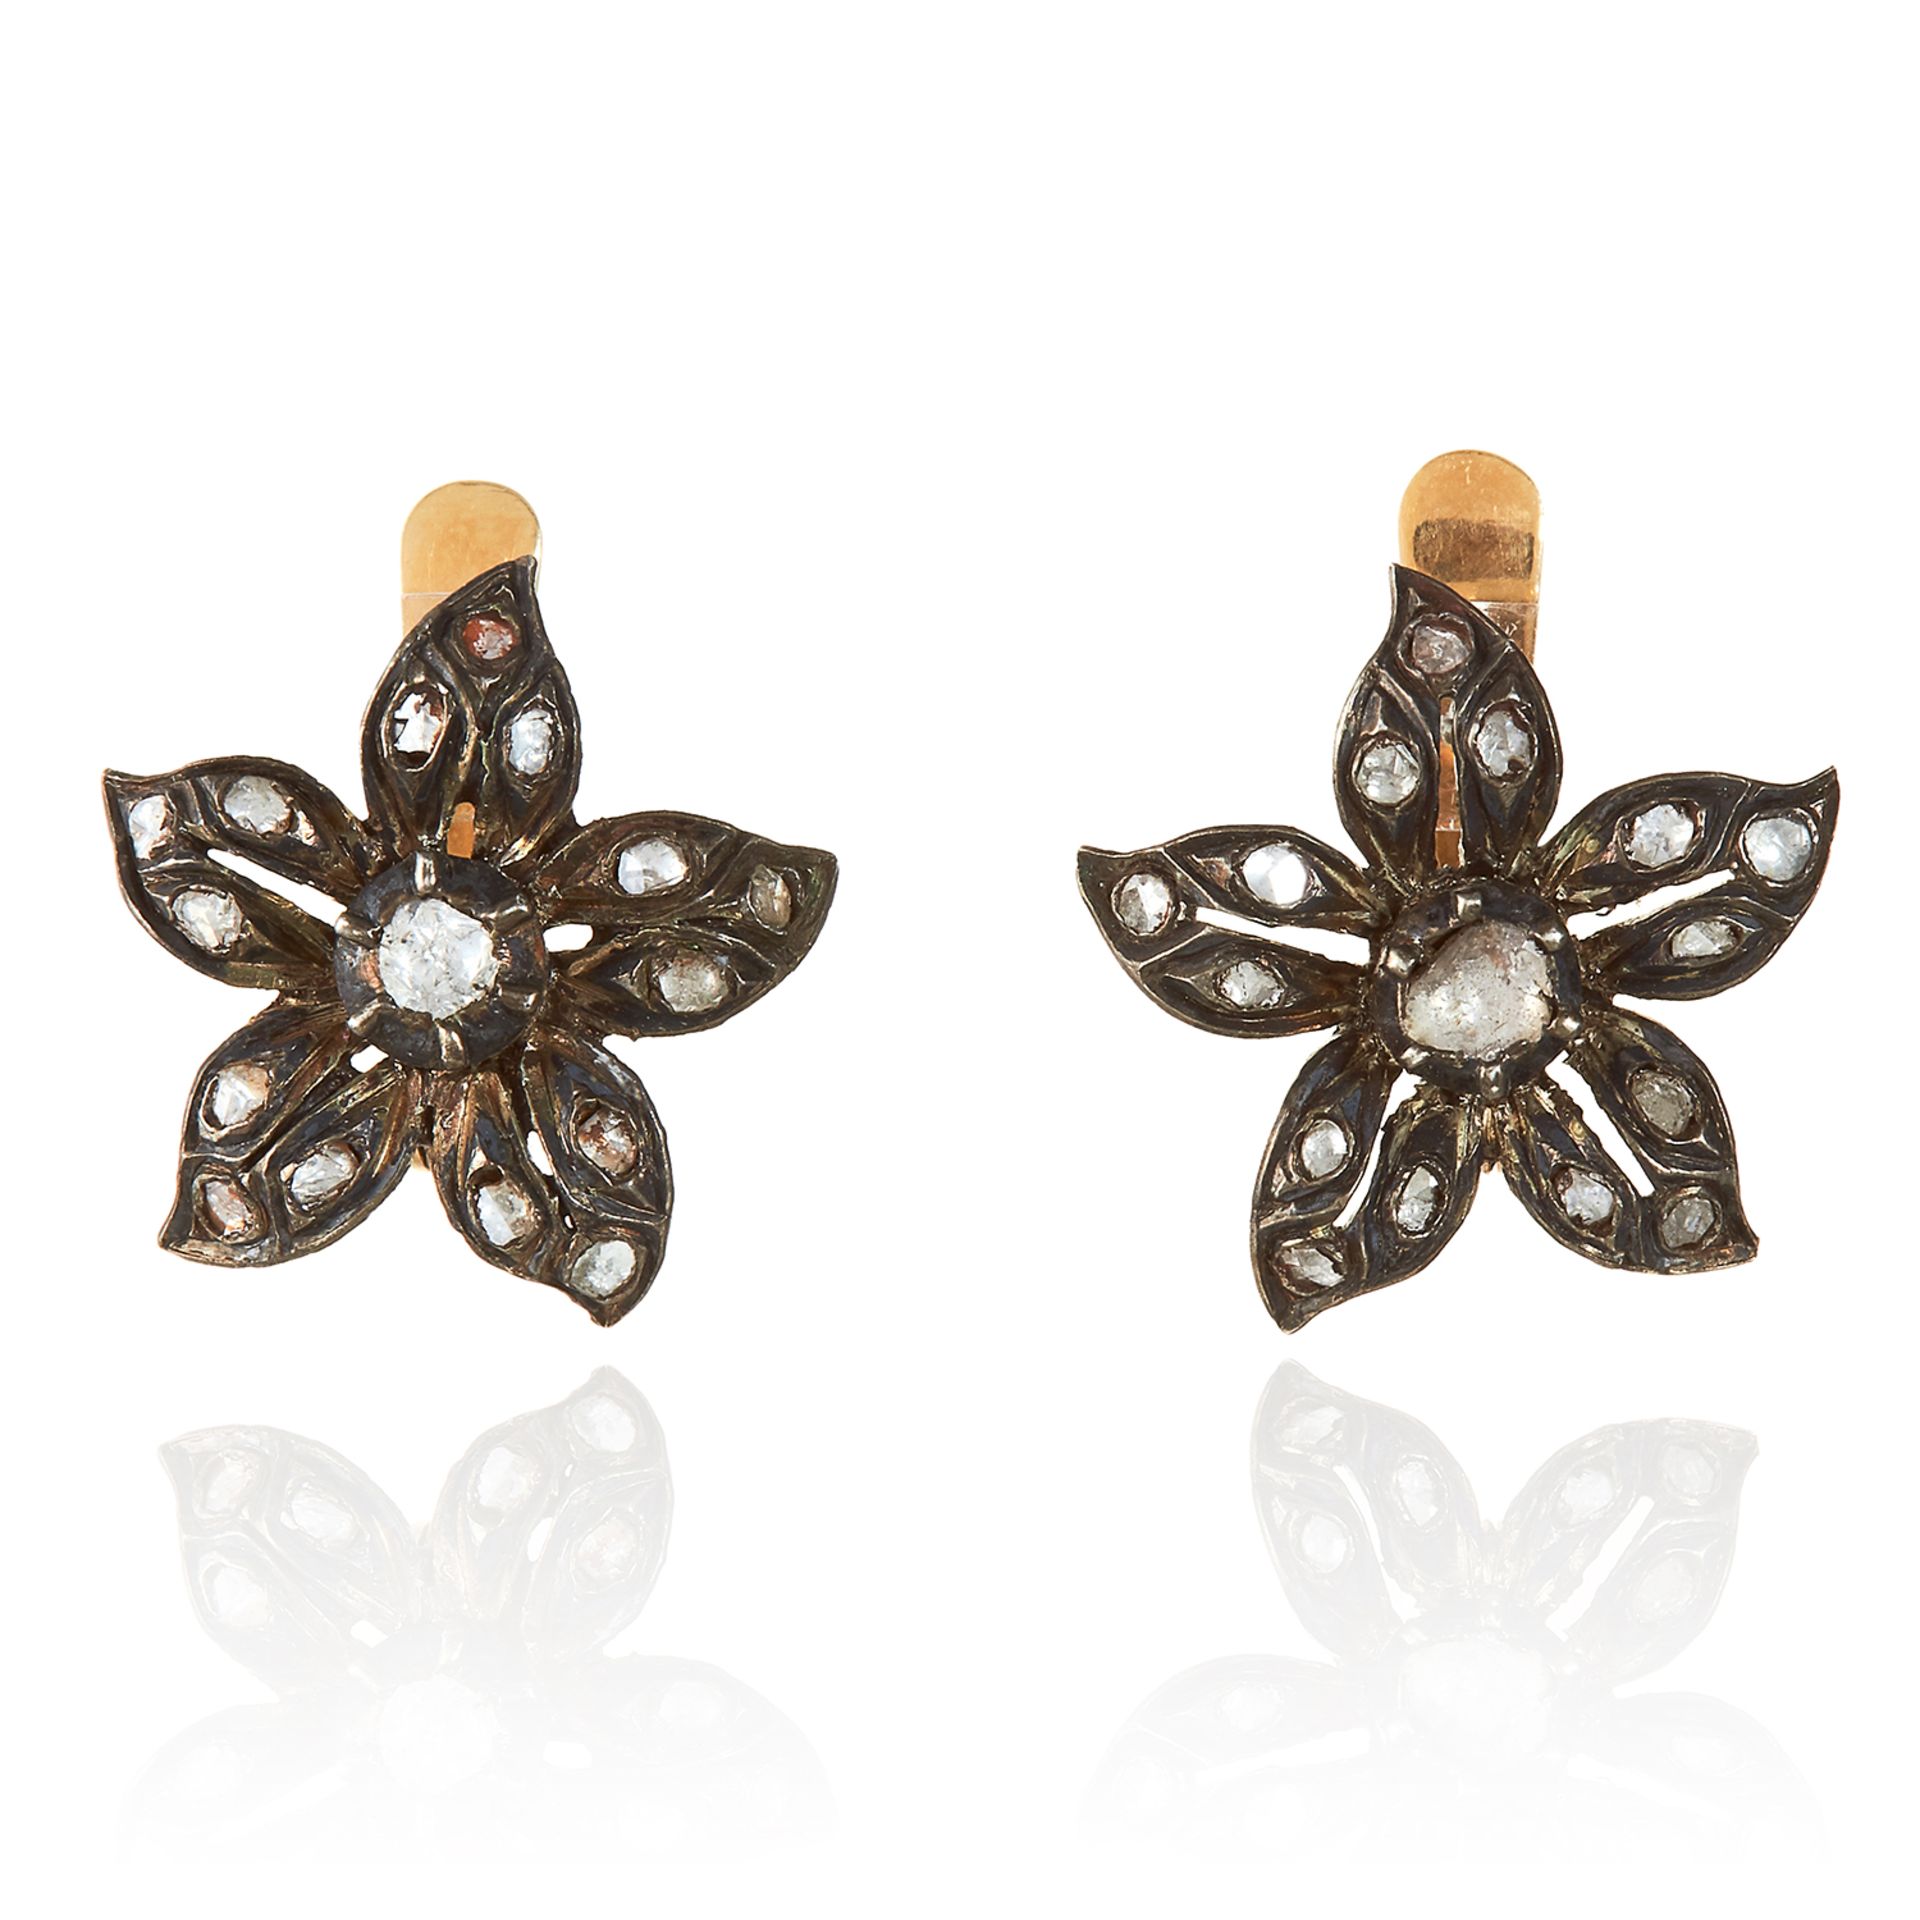 A PAIR OF ANTIQUE DIAMOND FLOWER EARRINGS in yellow gold and silver, unmarked, 1.9cm, 6.05g.